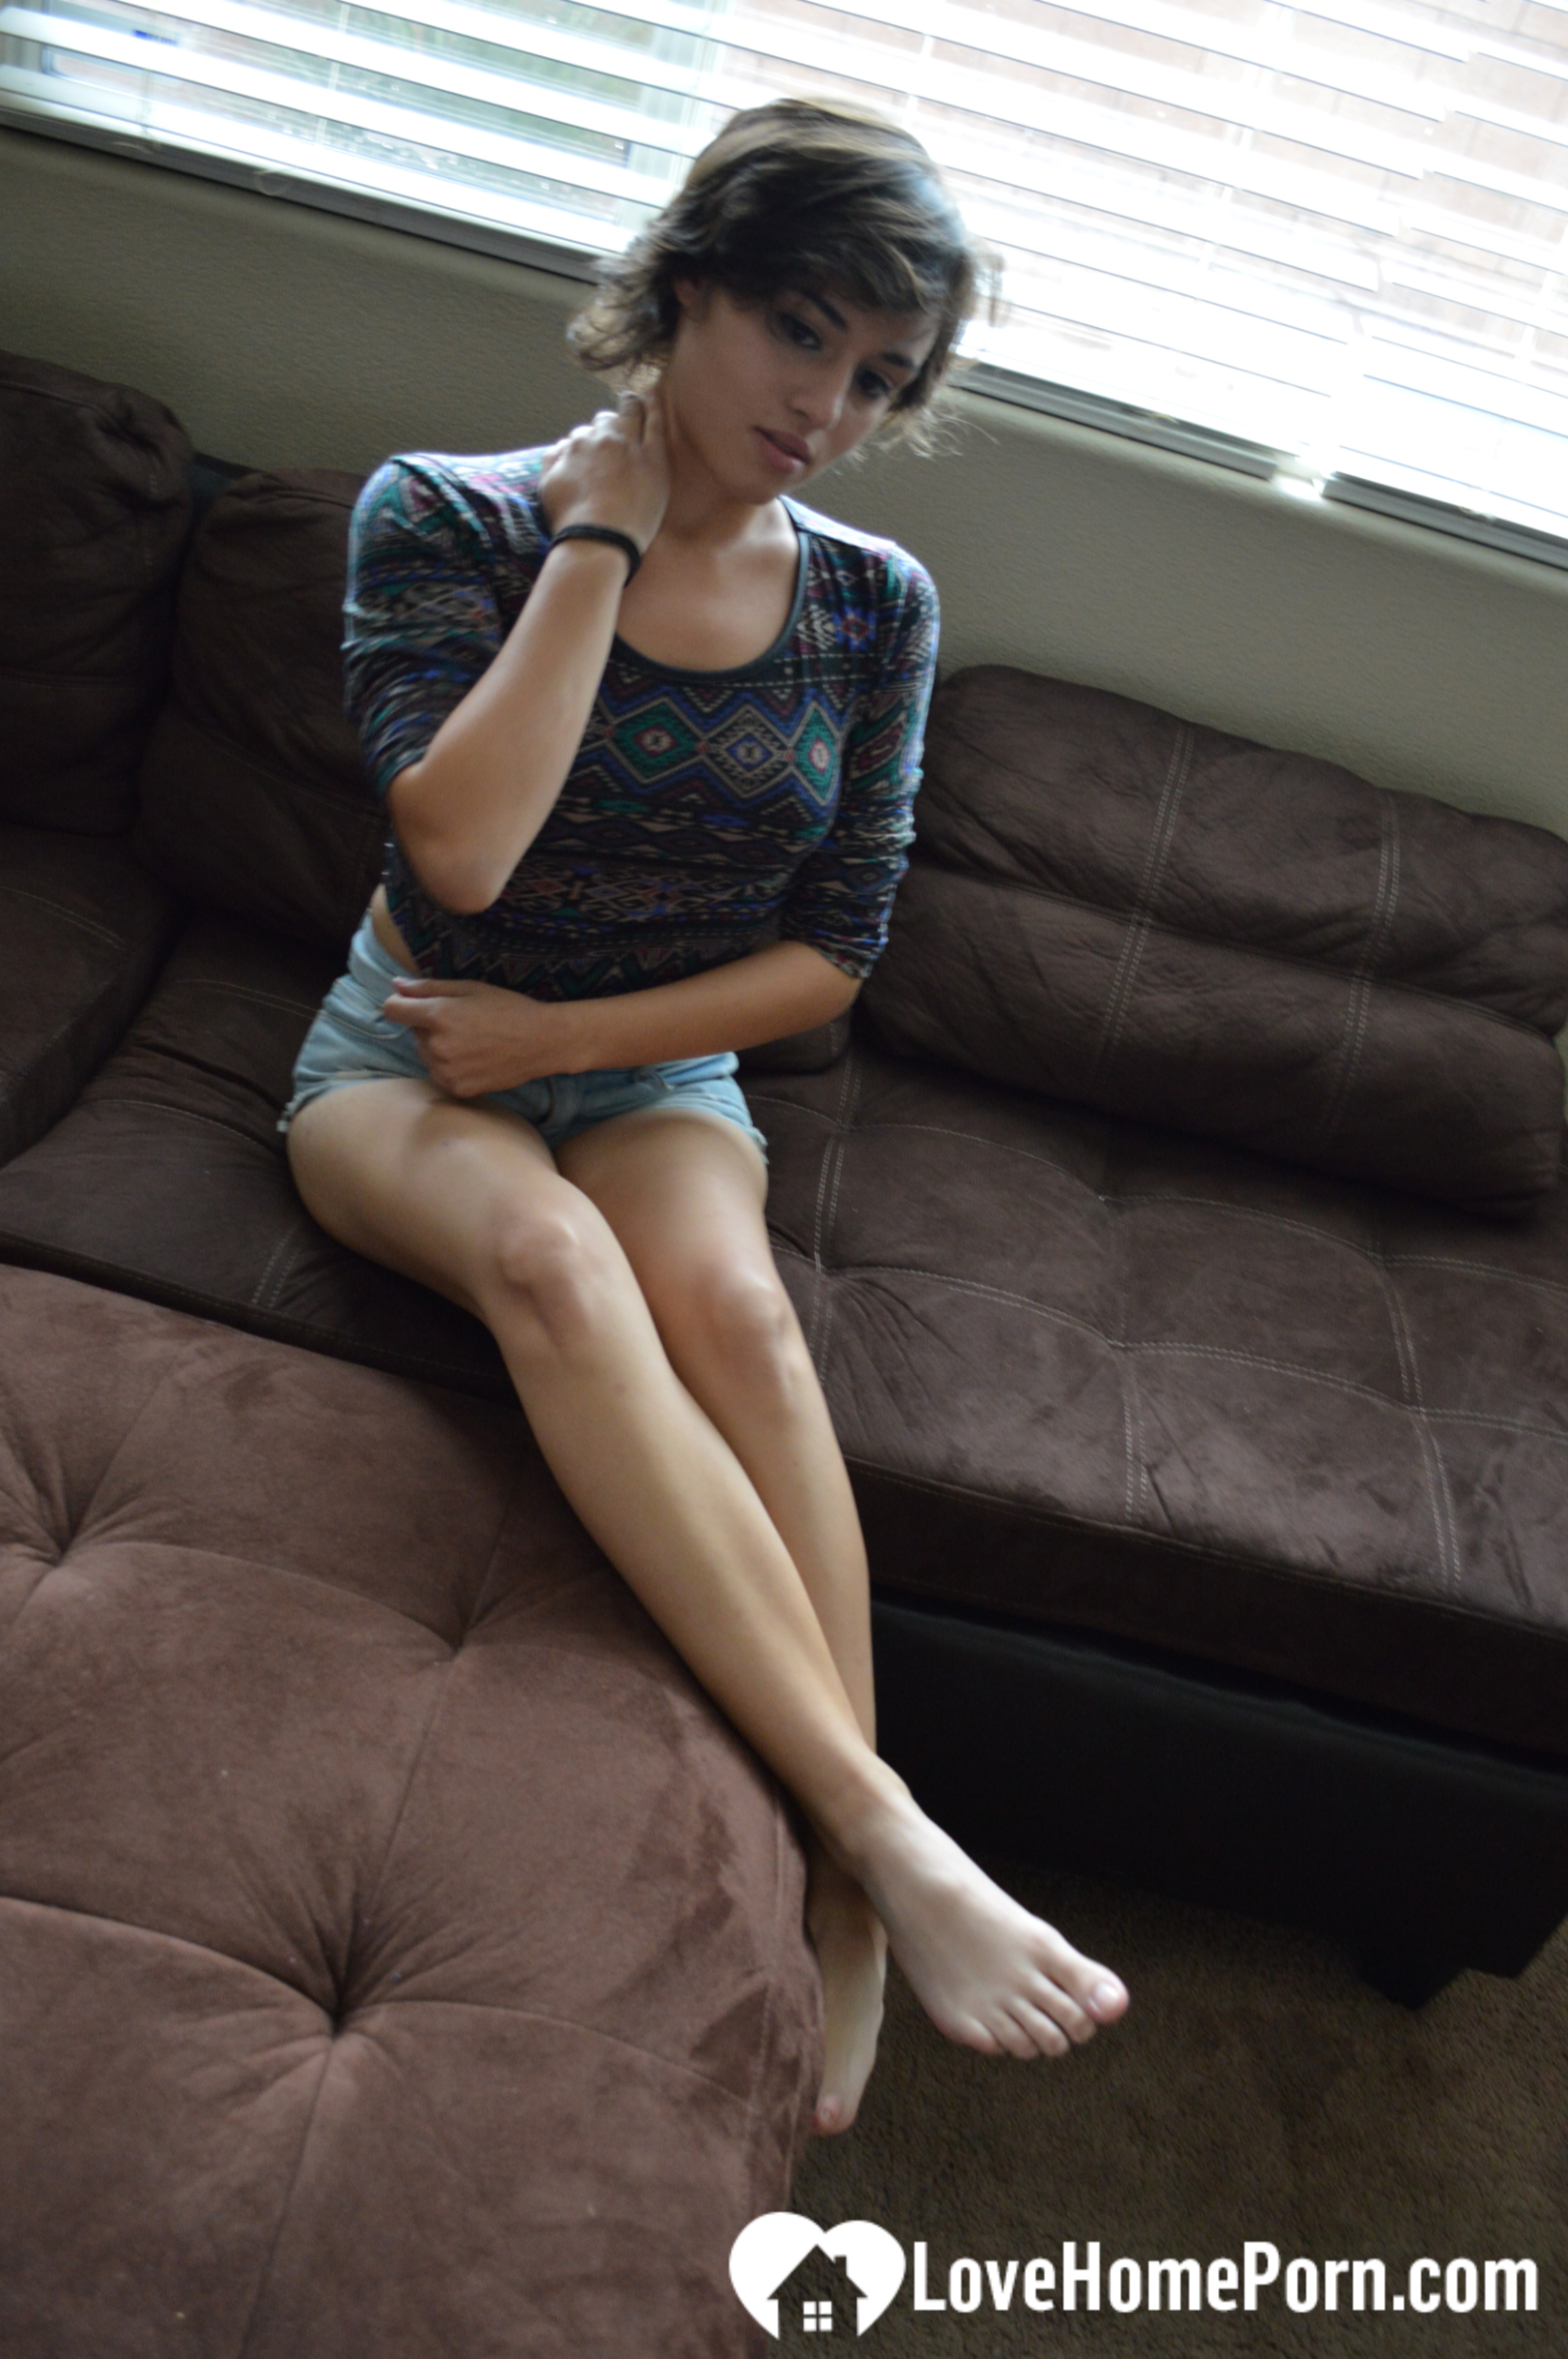 Pretty brunette satisfies herself on the couch